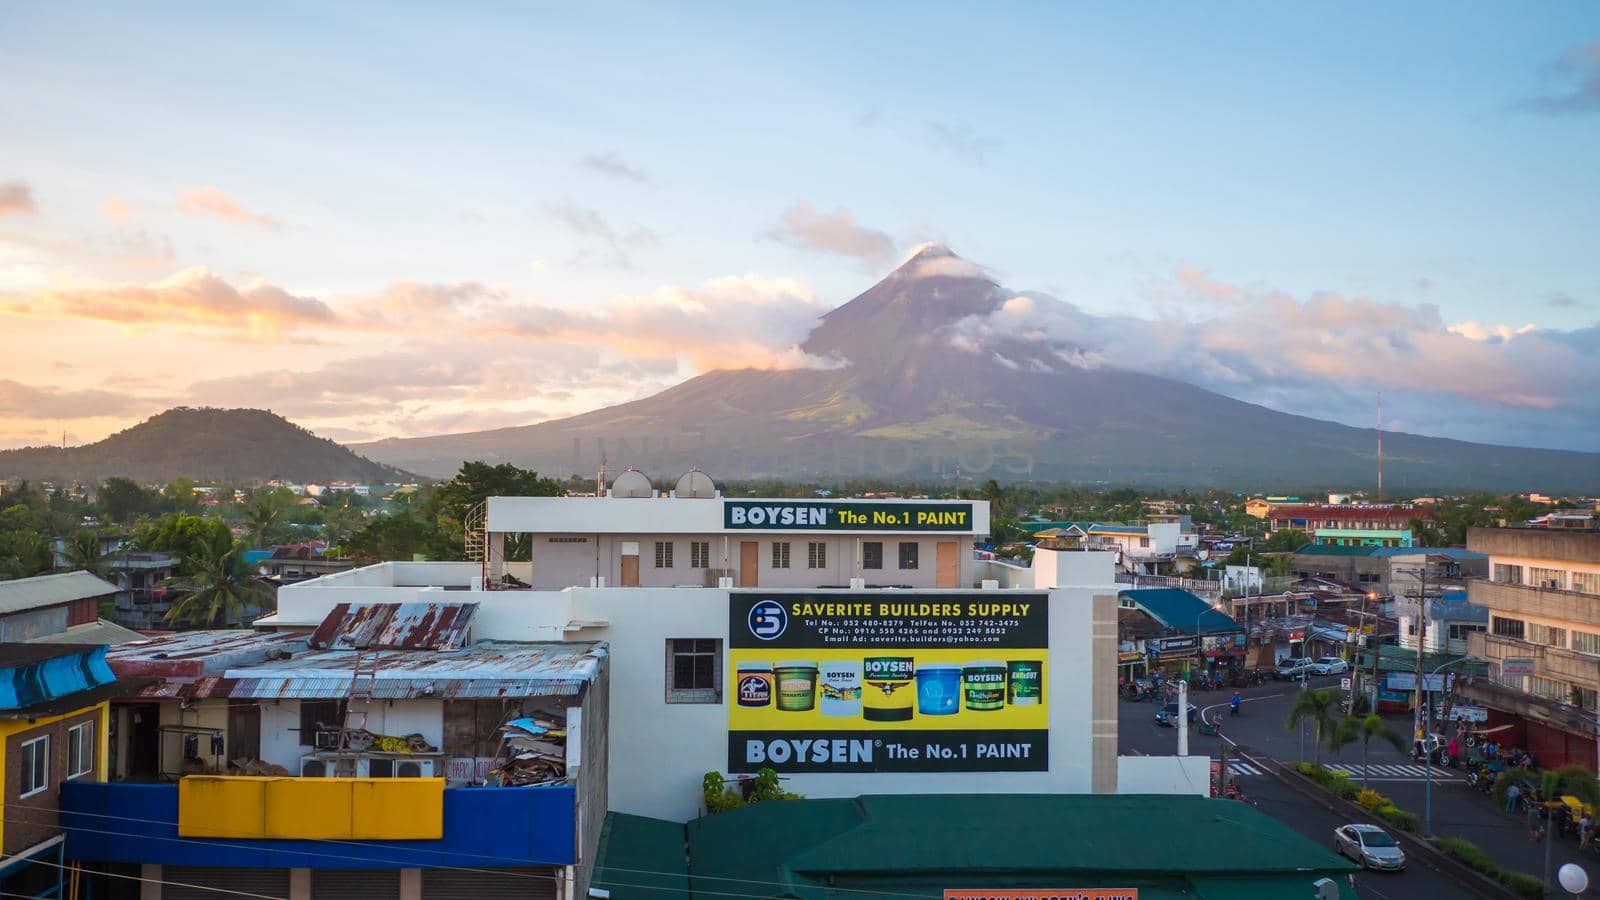 Legazpi City, Luzon, Philippines - Mount Mayon volcano looms over the city as daily life goes on.